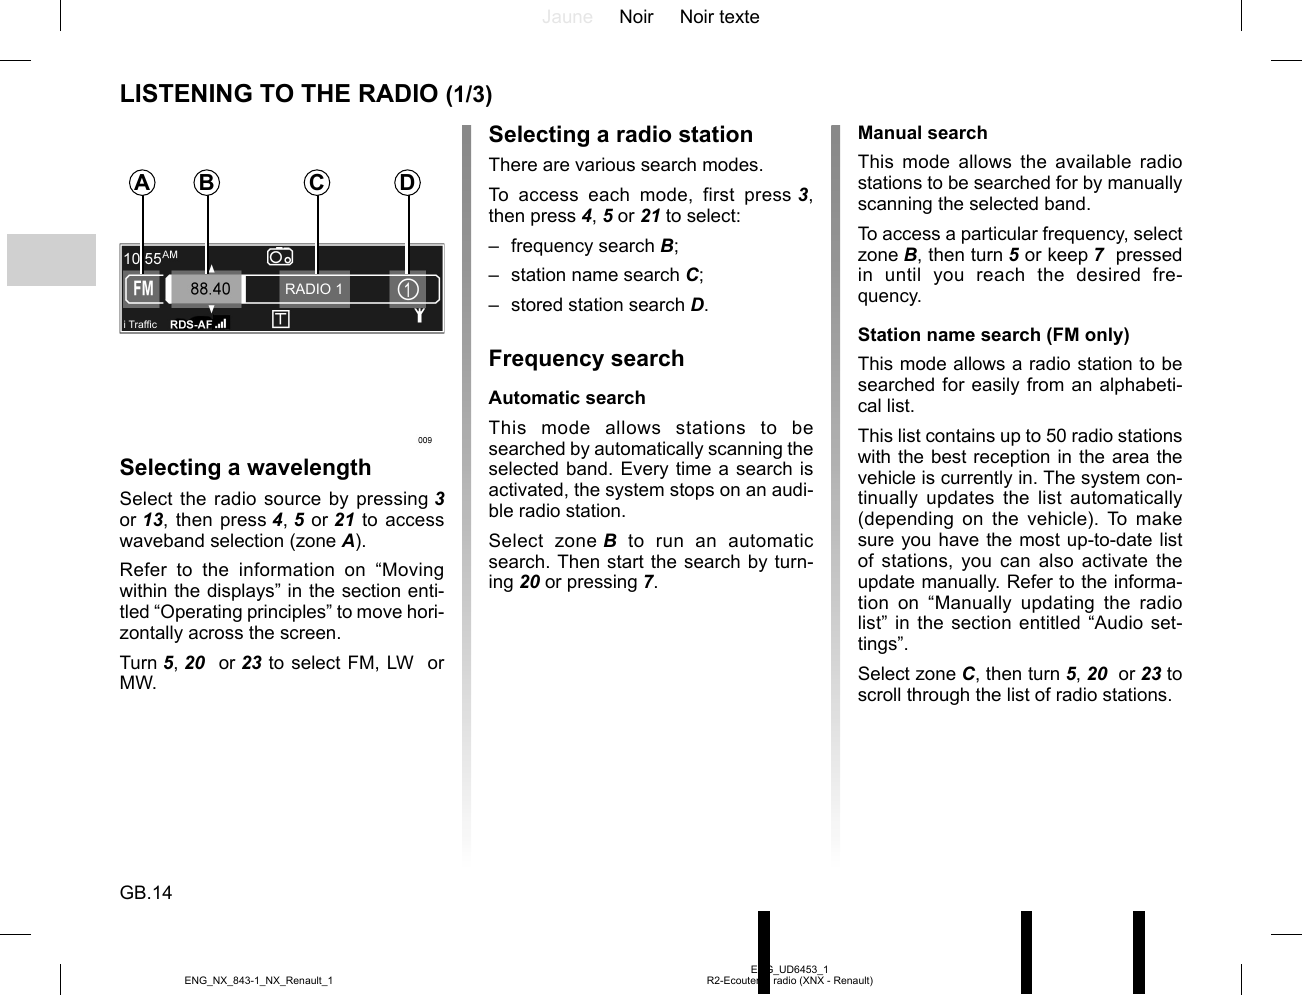 Jaune Noir Noir texteGB.14ENG_UD6453_1R2-Ecouter la radio (XNX - Renault)ENG_NX_843-1_NX_Renault_1LISTENING TO THE RADIO (1/3)Selecting a wavelengthSelect the radio source by pressing 3  or 13, then press 4, 5 or 21 to access waveband selection (zone A).Refer to the information on “Moving within the displays” in the section enti-tled “Operating principles” to move hori-zontally across the screen.Turn 5, 20  or 23 to select FM, LW  or MW.Selecting a radio stationThere are various search modes.To access each mode, first press 3, then press 4, 5 or 21 to select:– frequency search B;–  station name search C;–  stored station search D.Frequency searchAutomatic searchThis mode allows stations to be searched by automatically scanning the selected band. Every time a search is activated, the system stops on an audi-ble radio station.Select zone B to run an automatic search. Then start the search by turn-ing 20 or pressing 7.Manual searchThis mode allows the available radio stations to be searched for by manually scanning the selected band.To access a particular frequency, select zone B, then turn 5 or keep 7  pressed in until you reach the desired fre-quency.Station name search (FM only)This mode allows a radio station to be searched for easily from an alphabeti-cal list.This list contains up to 50 radio stations with the best reception in the area the vehicle is currently in. The system con-tinually updates the list automatically (depending on the vehicle). To make sure you have the most up-to-date list of stations, you can also activate the update manually. Refer to the informa-tion on “Manually updating the radio list” in the section entitled “Audio set-tings”.Select zone C, then turn 5, 20  or 23 to scroll through the list of radio stations.i Traf¿ cRADIO 1A B C D